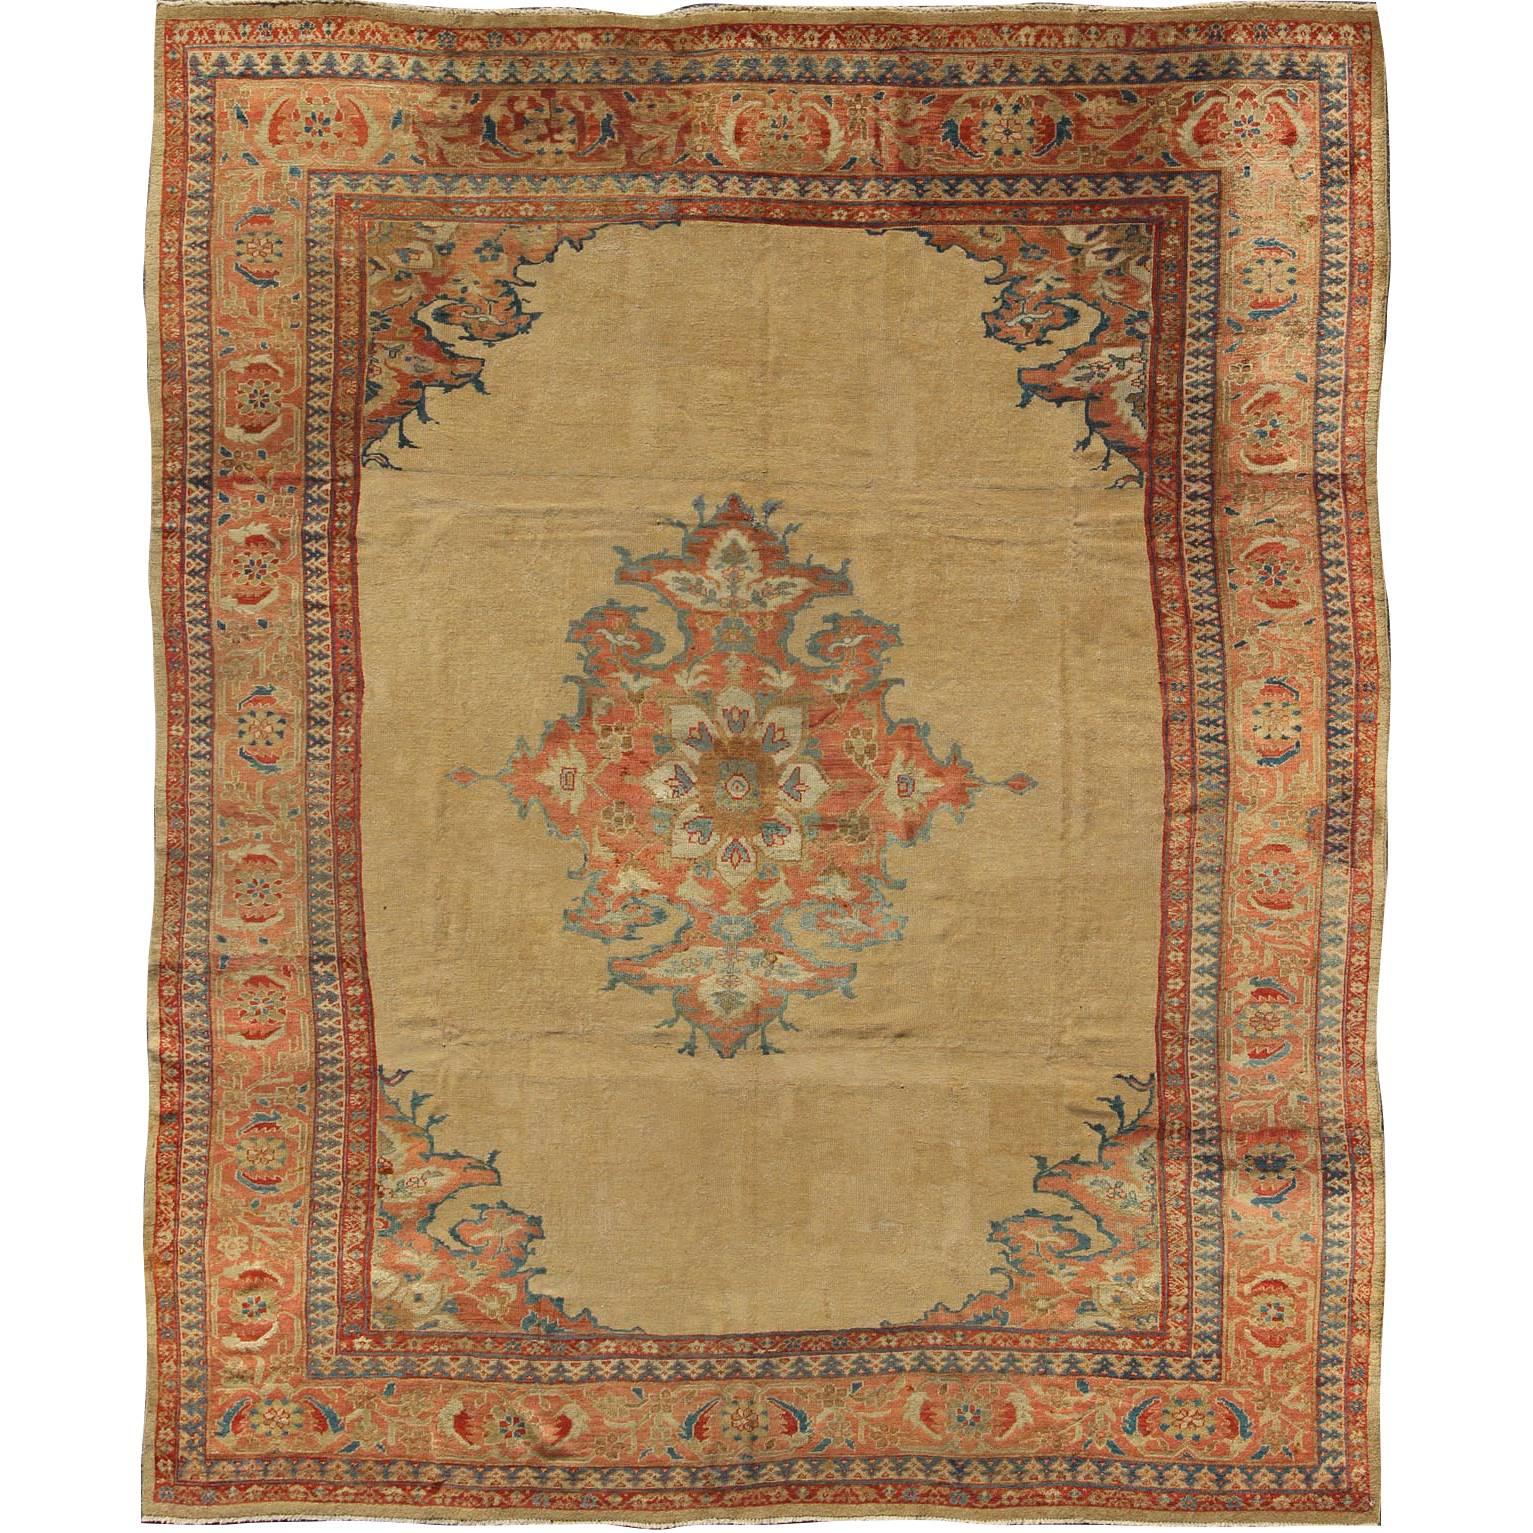 Antique Persian Ziegler Sultanabad Rug in Light Yellow Background with Salmon